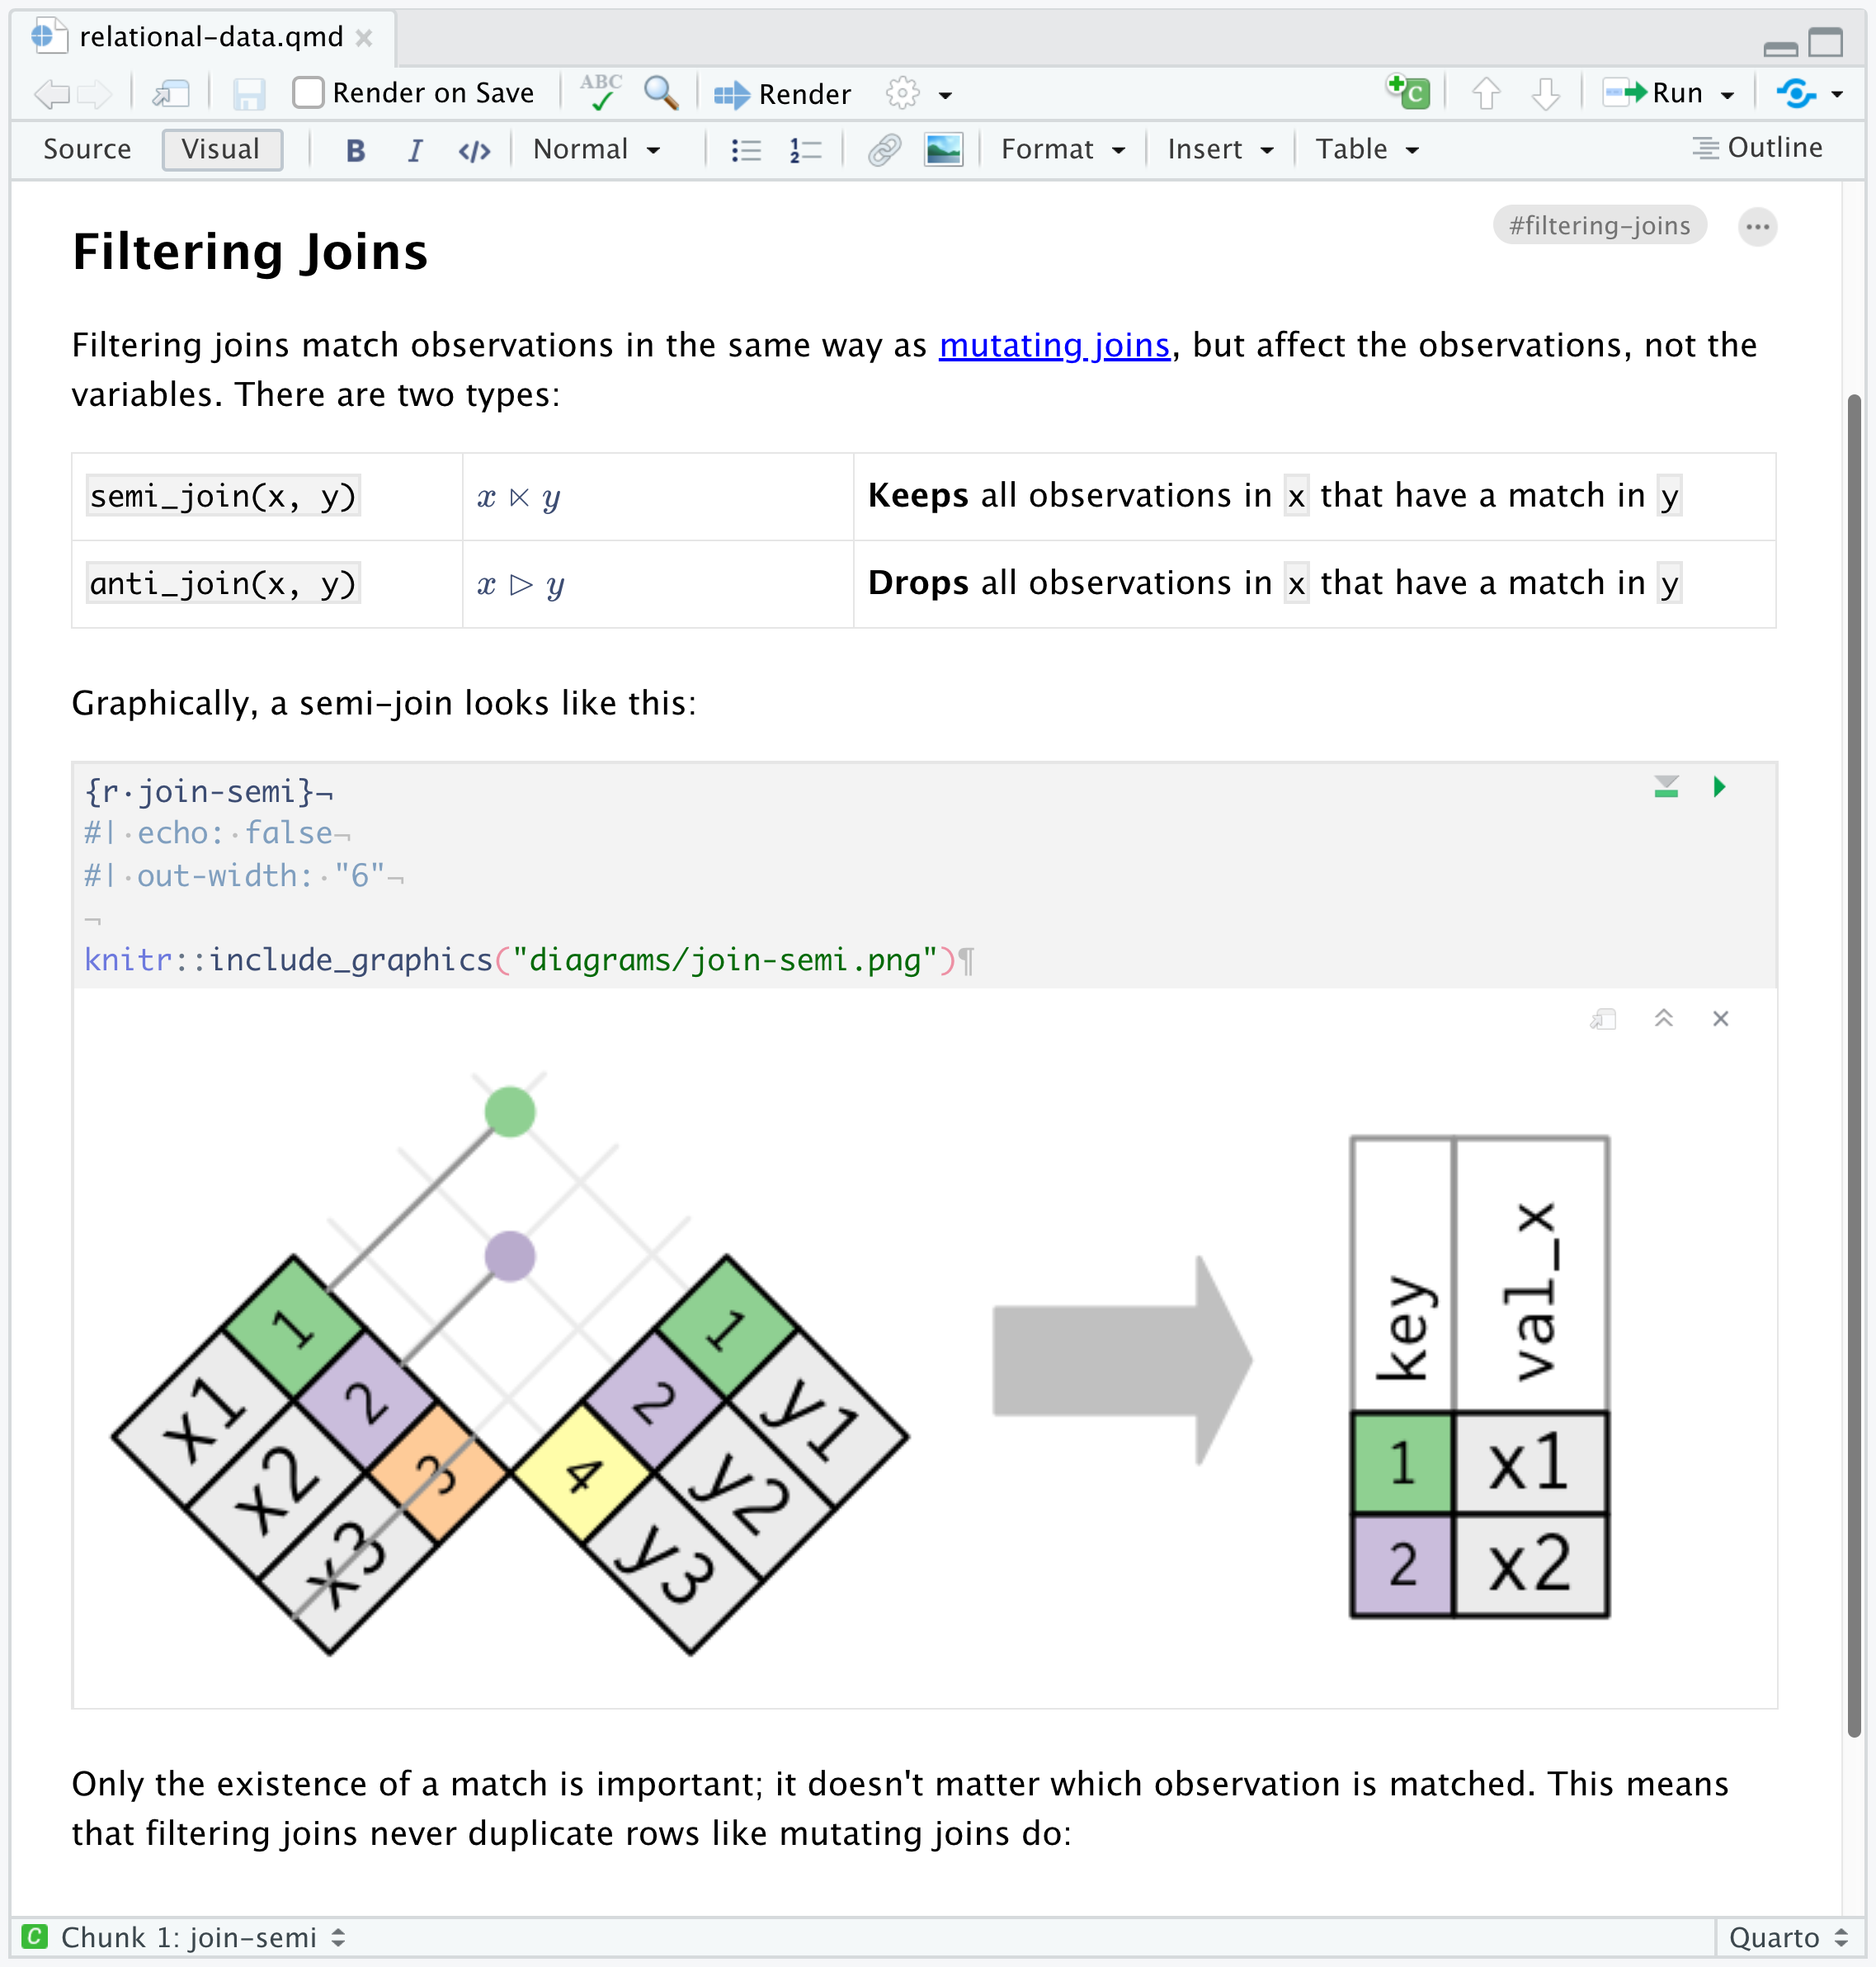 An R Markdown file opened in the RStudio visual editor. The page is titled 'Filter joins'. Underneath is a table containing R syntax, mathematical notation, and definitions for the semi- and anti-joins. Underneath this table is an R code chunk that displays a graphical representation of a semi-join.